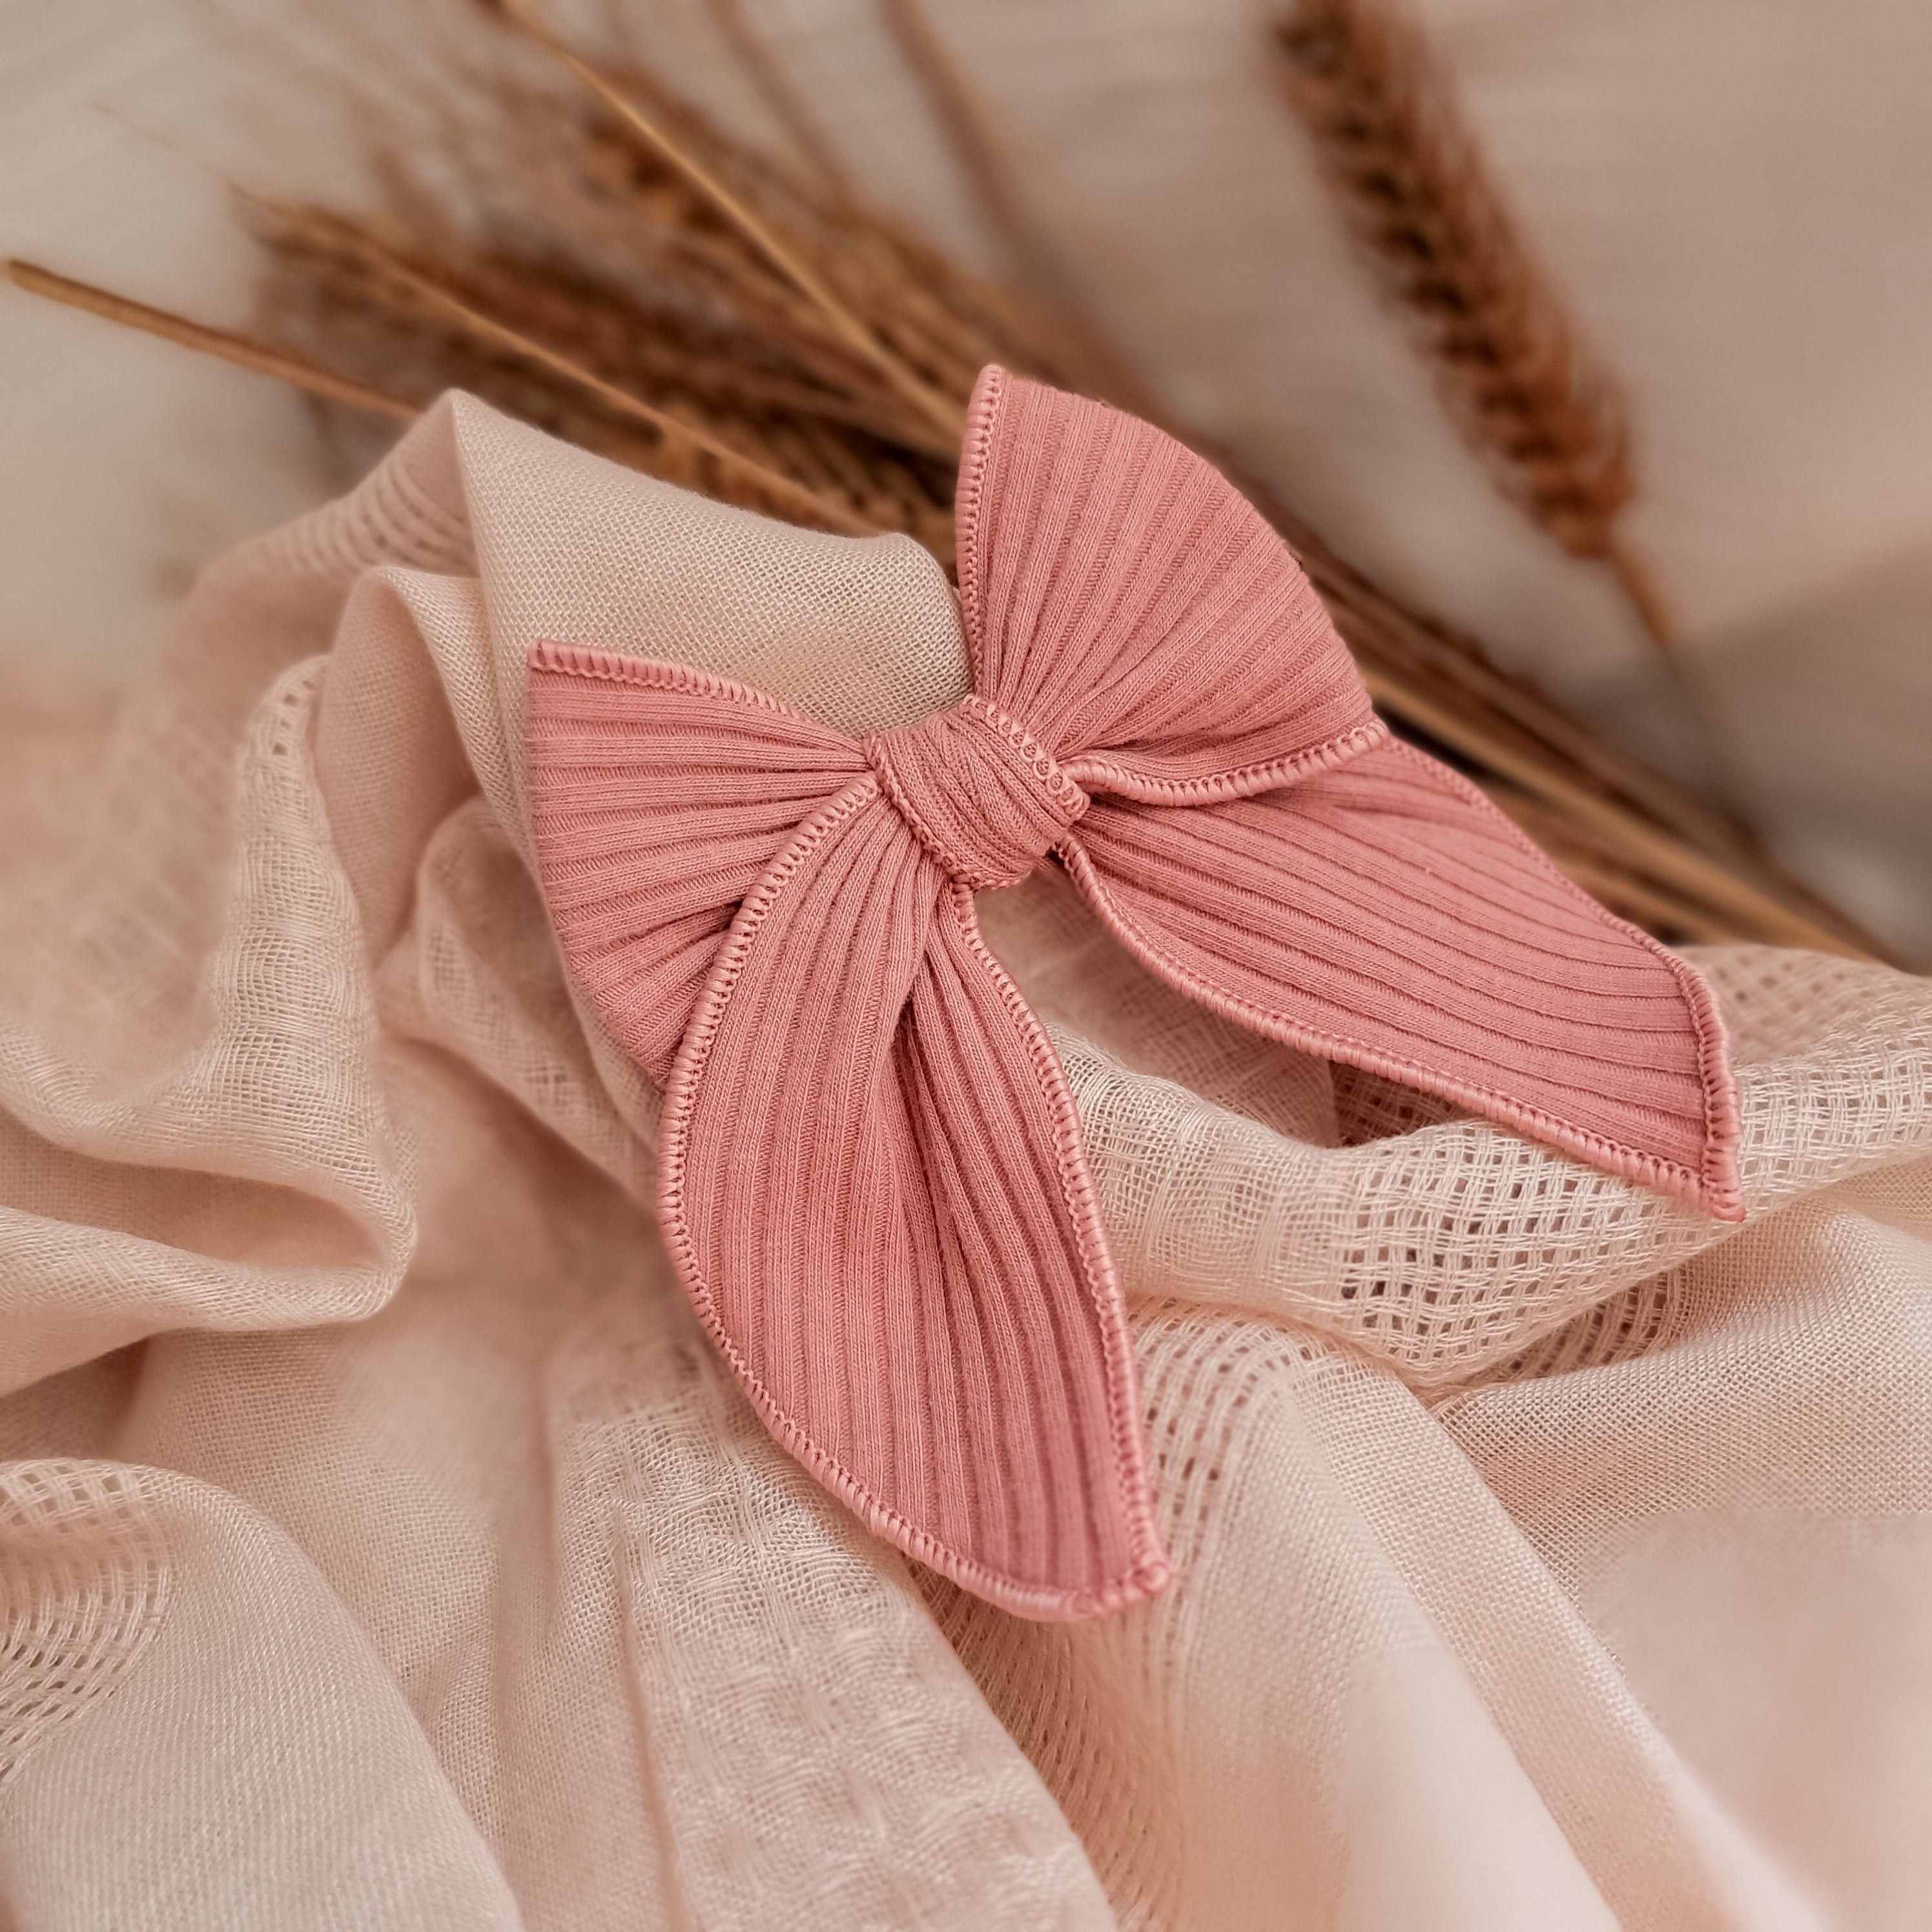 WHIMSY BOW // DUSTY ROSE RIB KNIT - Elisa’s Little Blossoms 